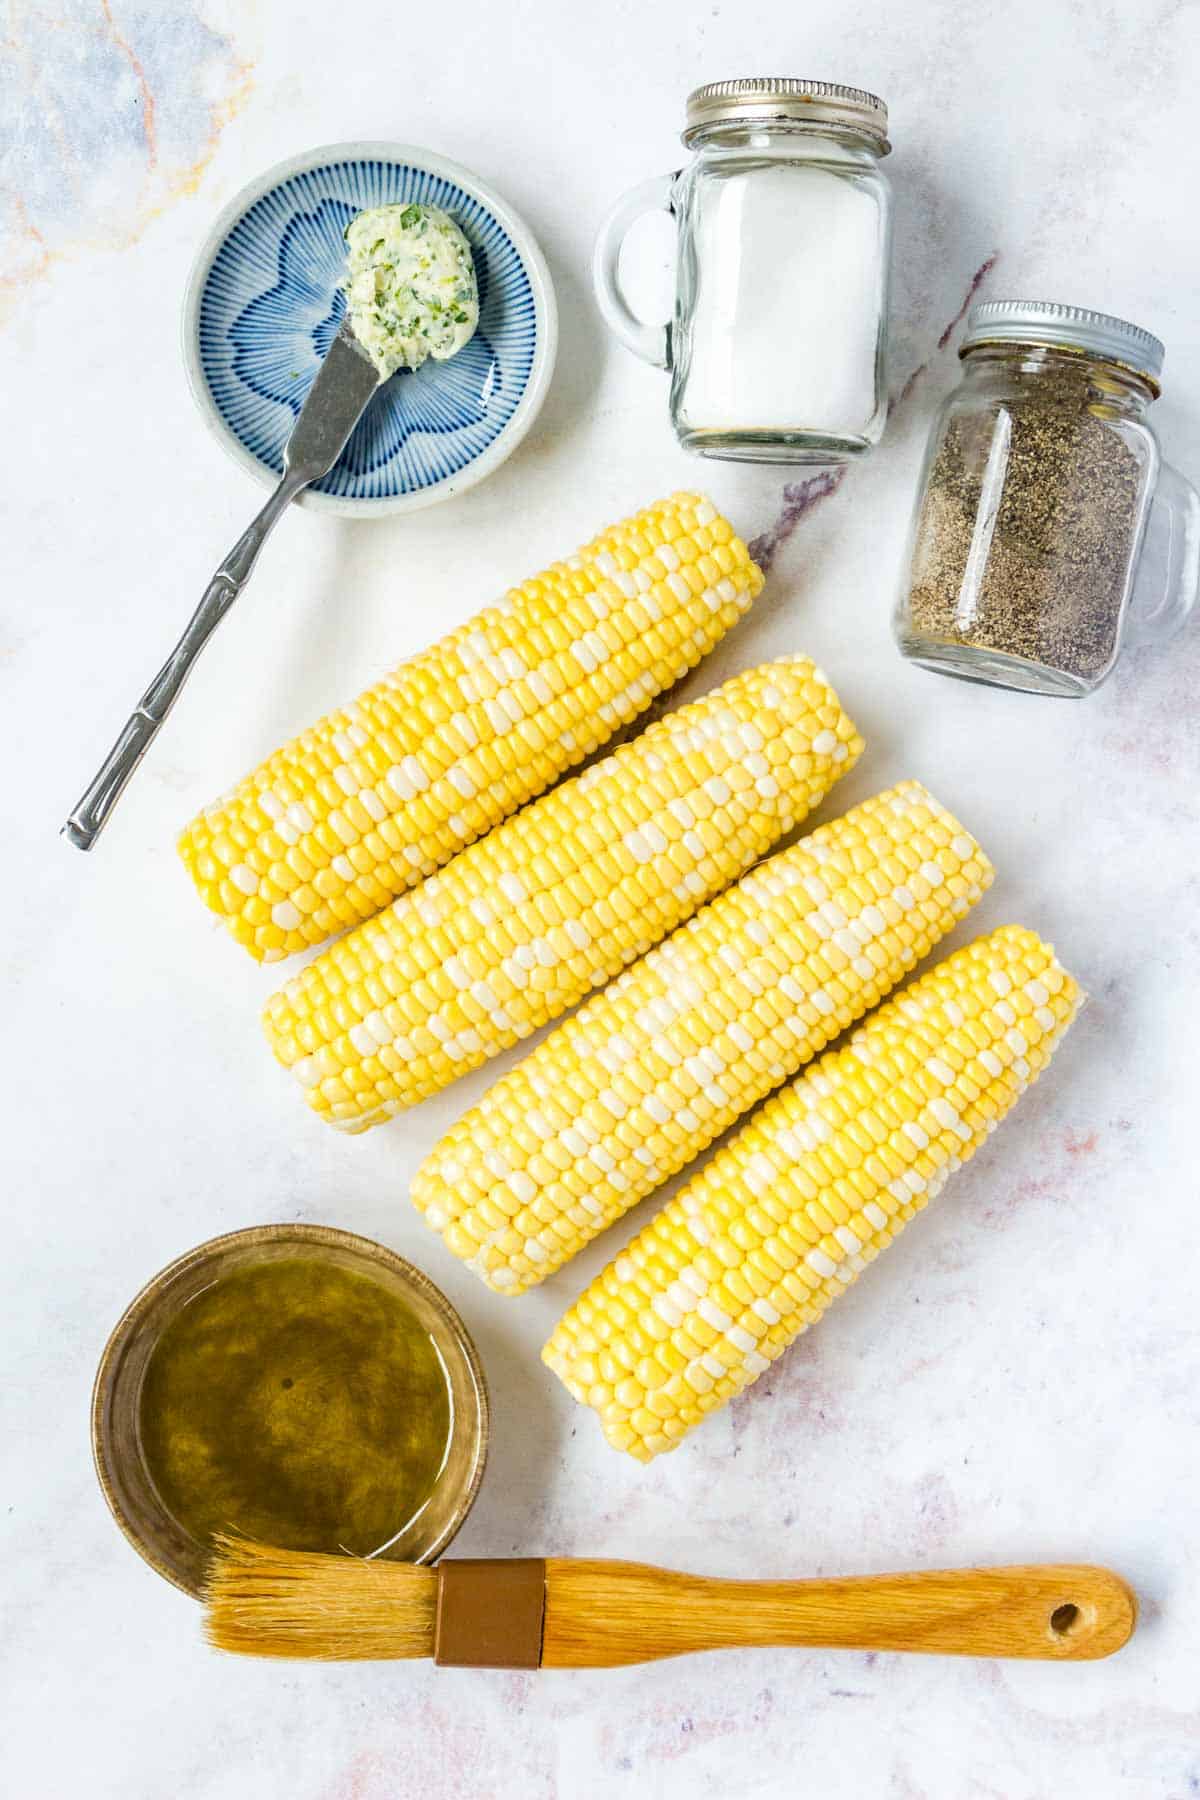 The ingredients for air fryer corn on the cob.